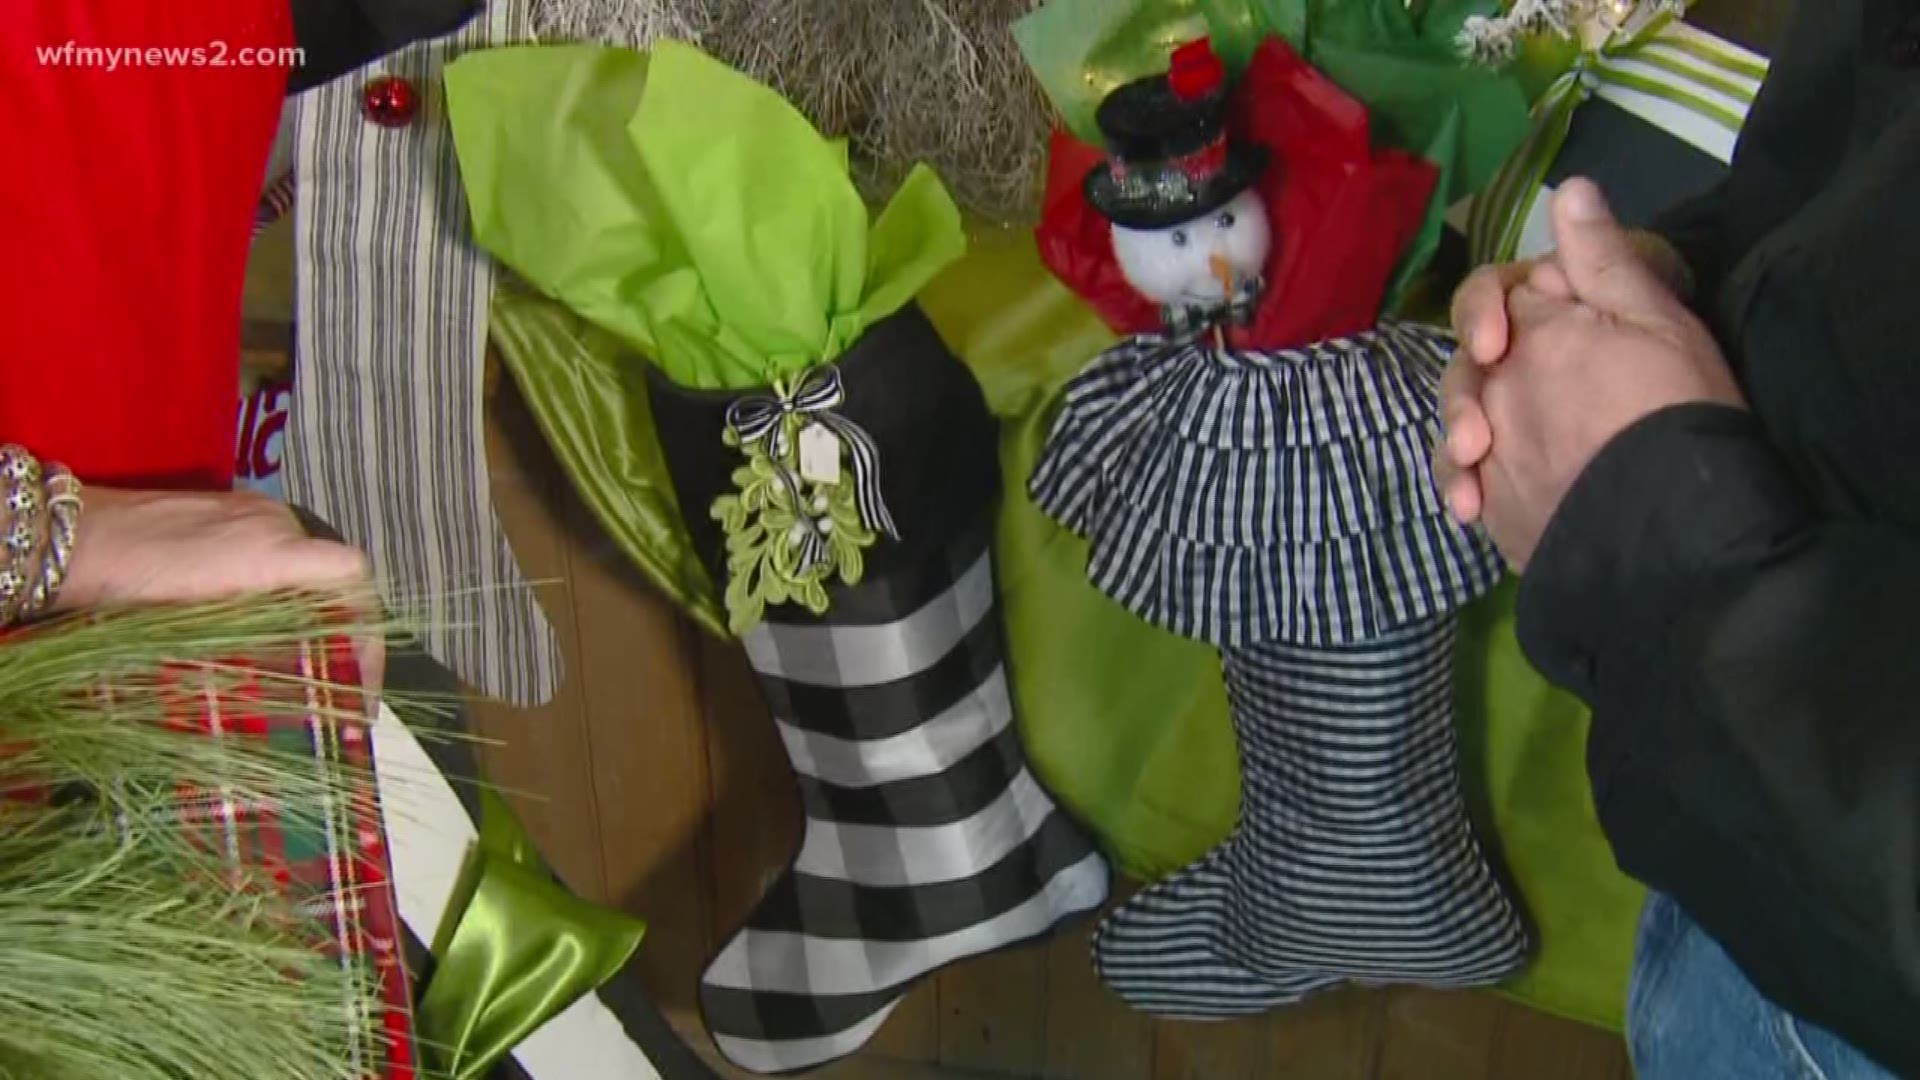 Nancy McGee gives pointers on how to fill your stockings before Santa comes down your chimney.